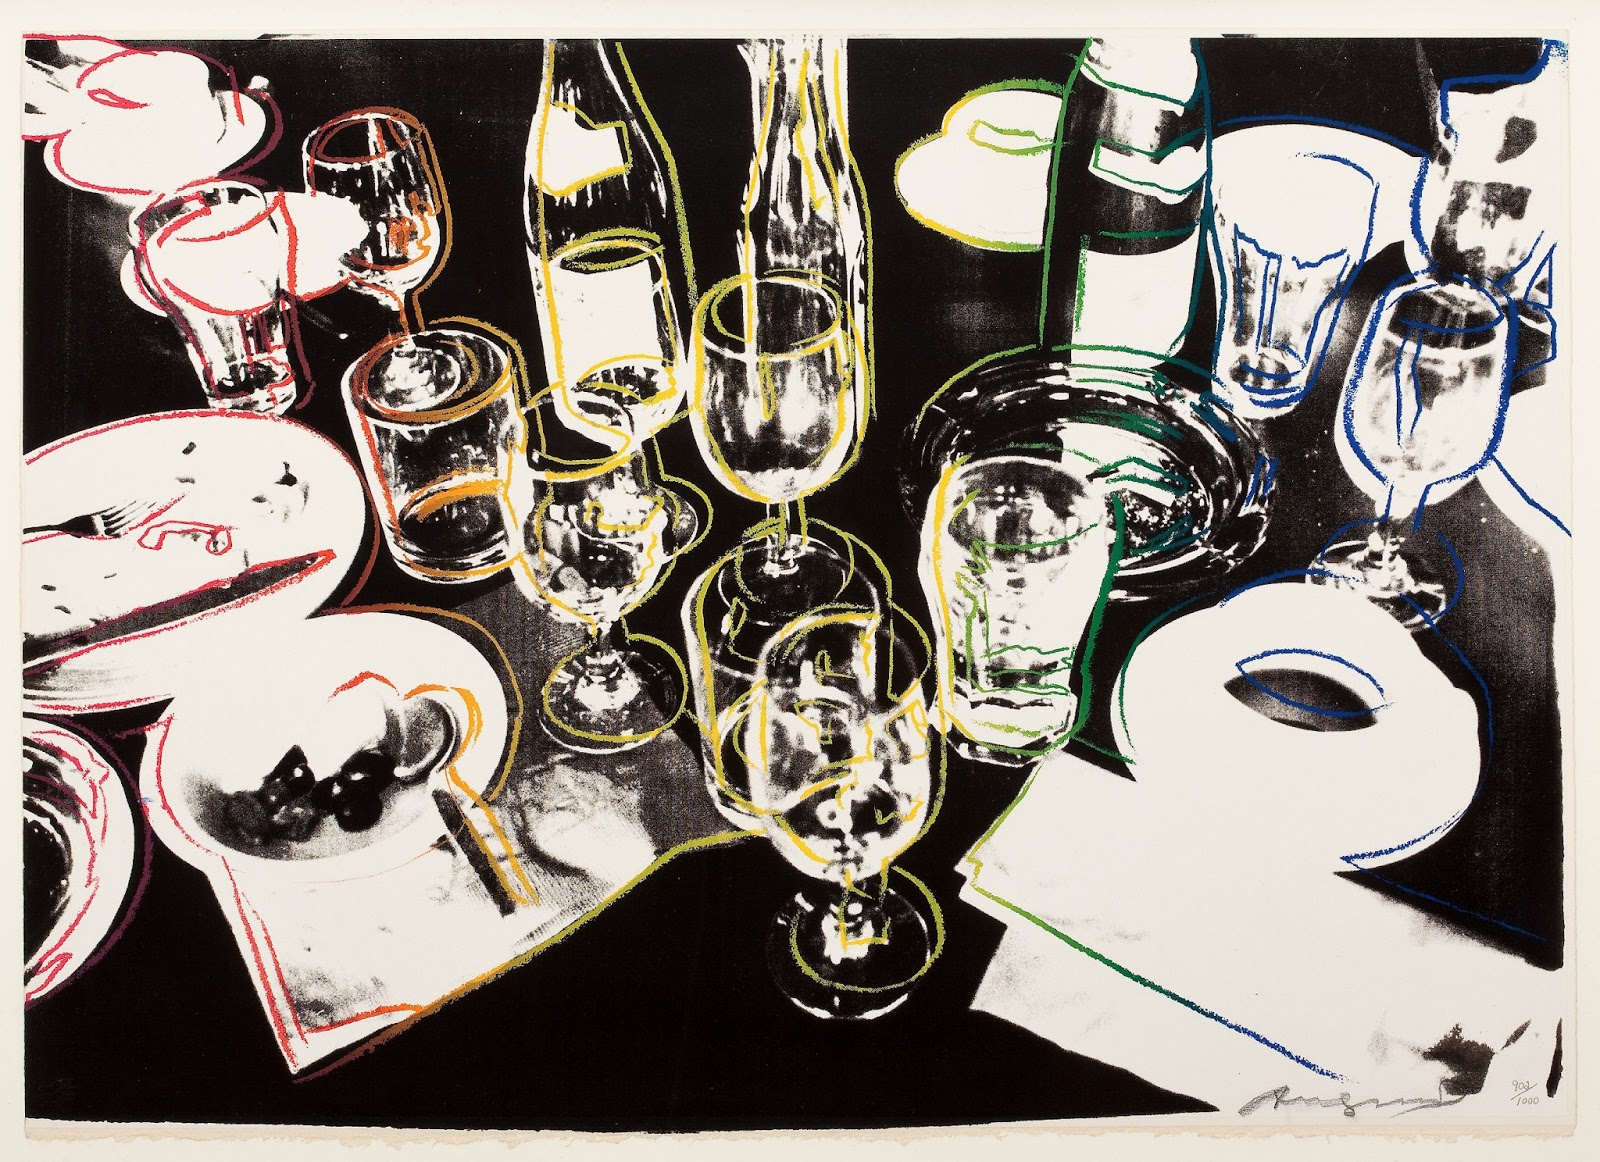 After the Party by Andy Warhol - 1979 - 15 x 38 cm private collection